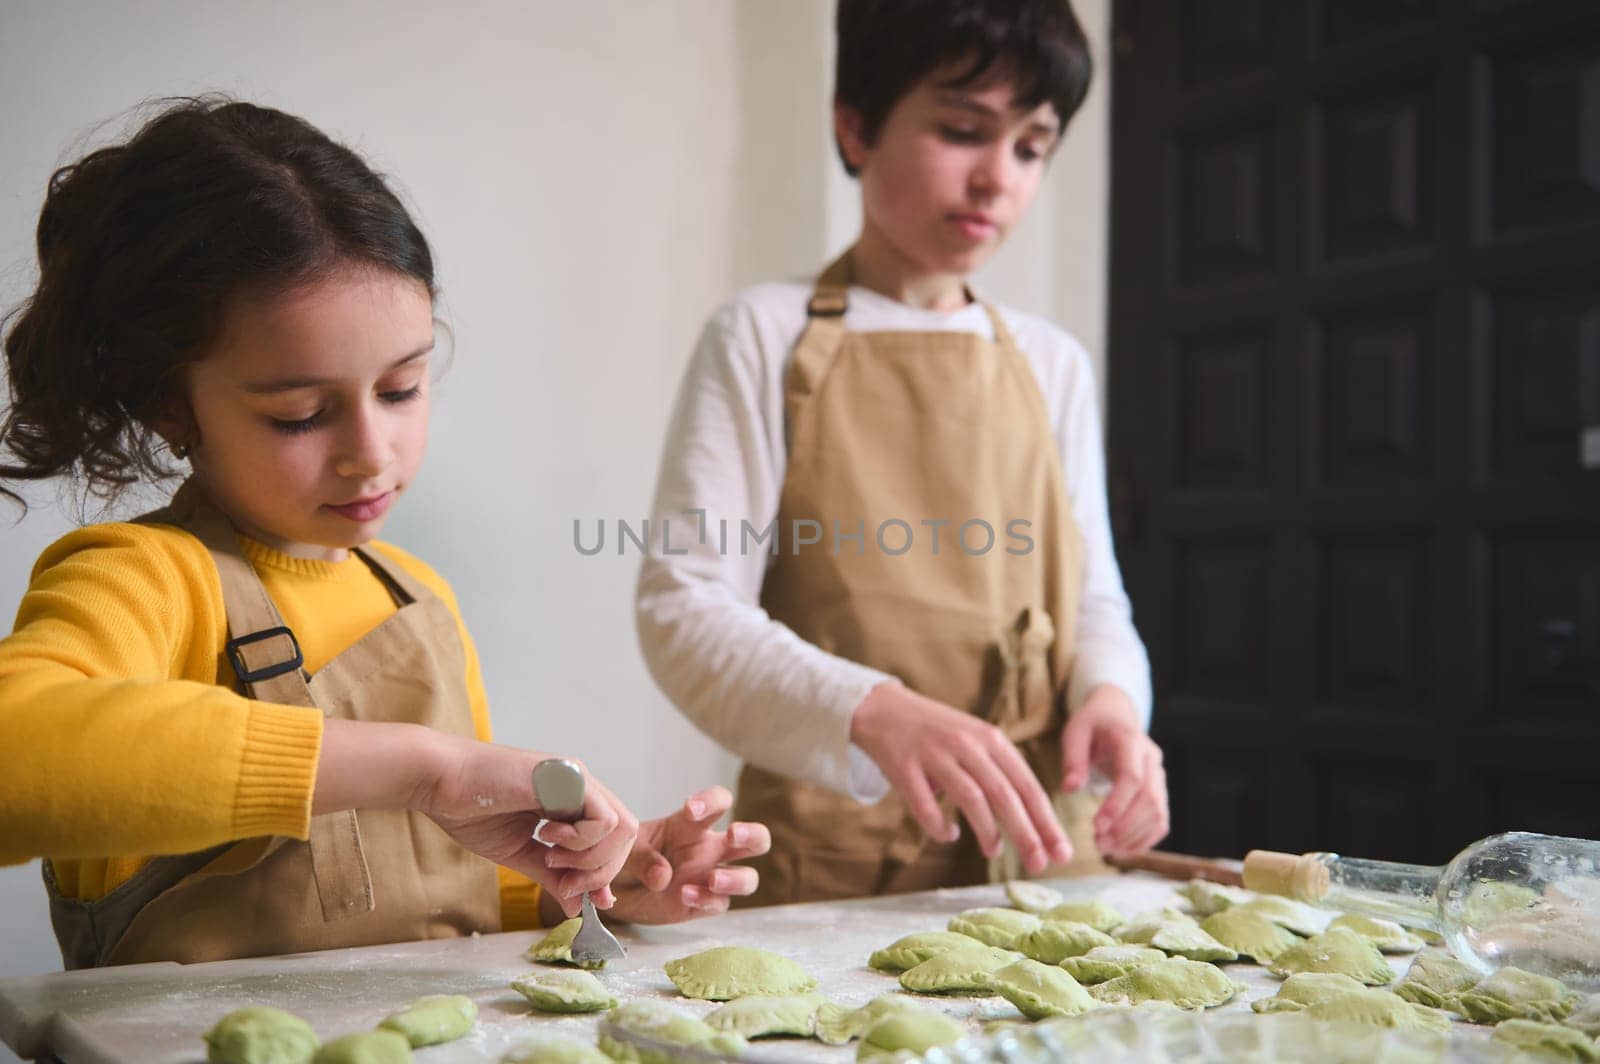 Brother and sister in beige chef's aprons, stuffing rolled dough rounds, making dumplings in the rural house kitchen interior. Adorable kids preparing dinner, learning the culinary at home by artgf